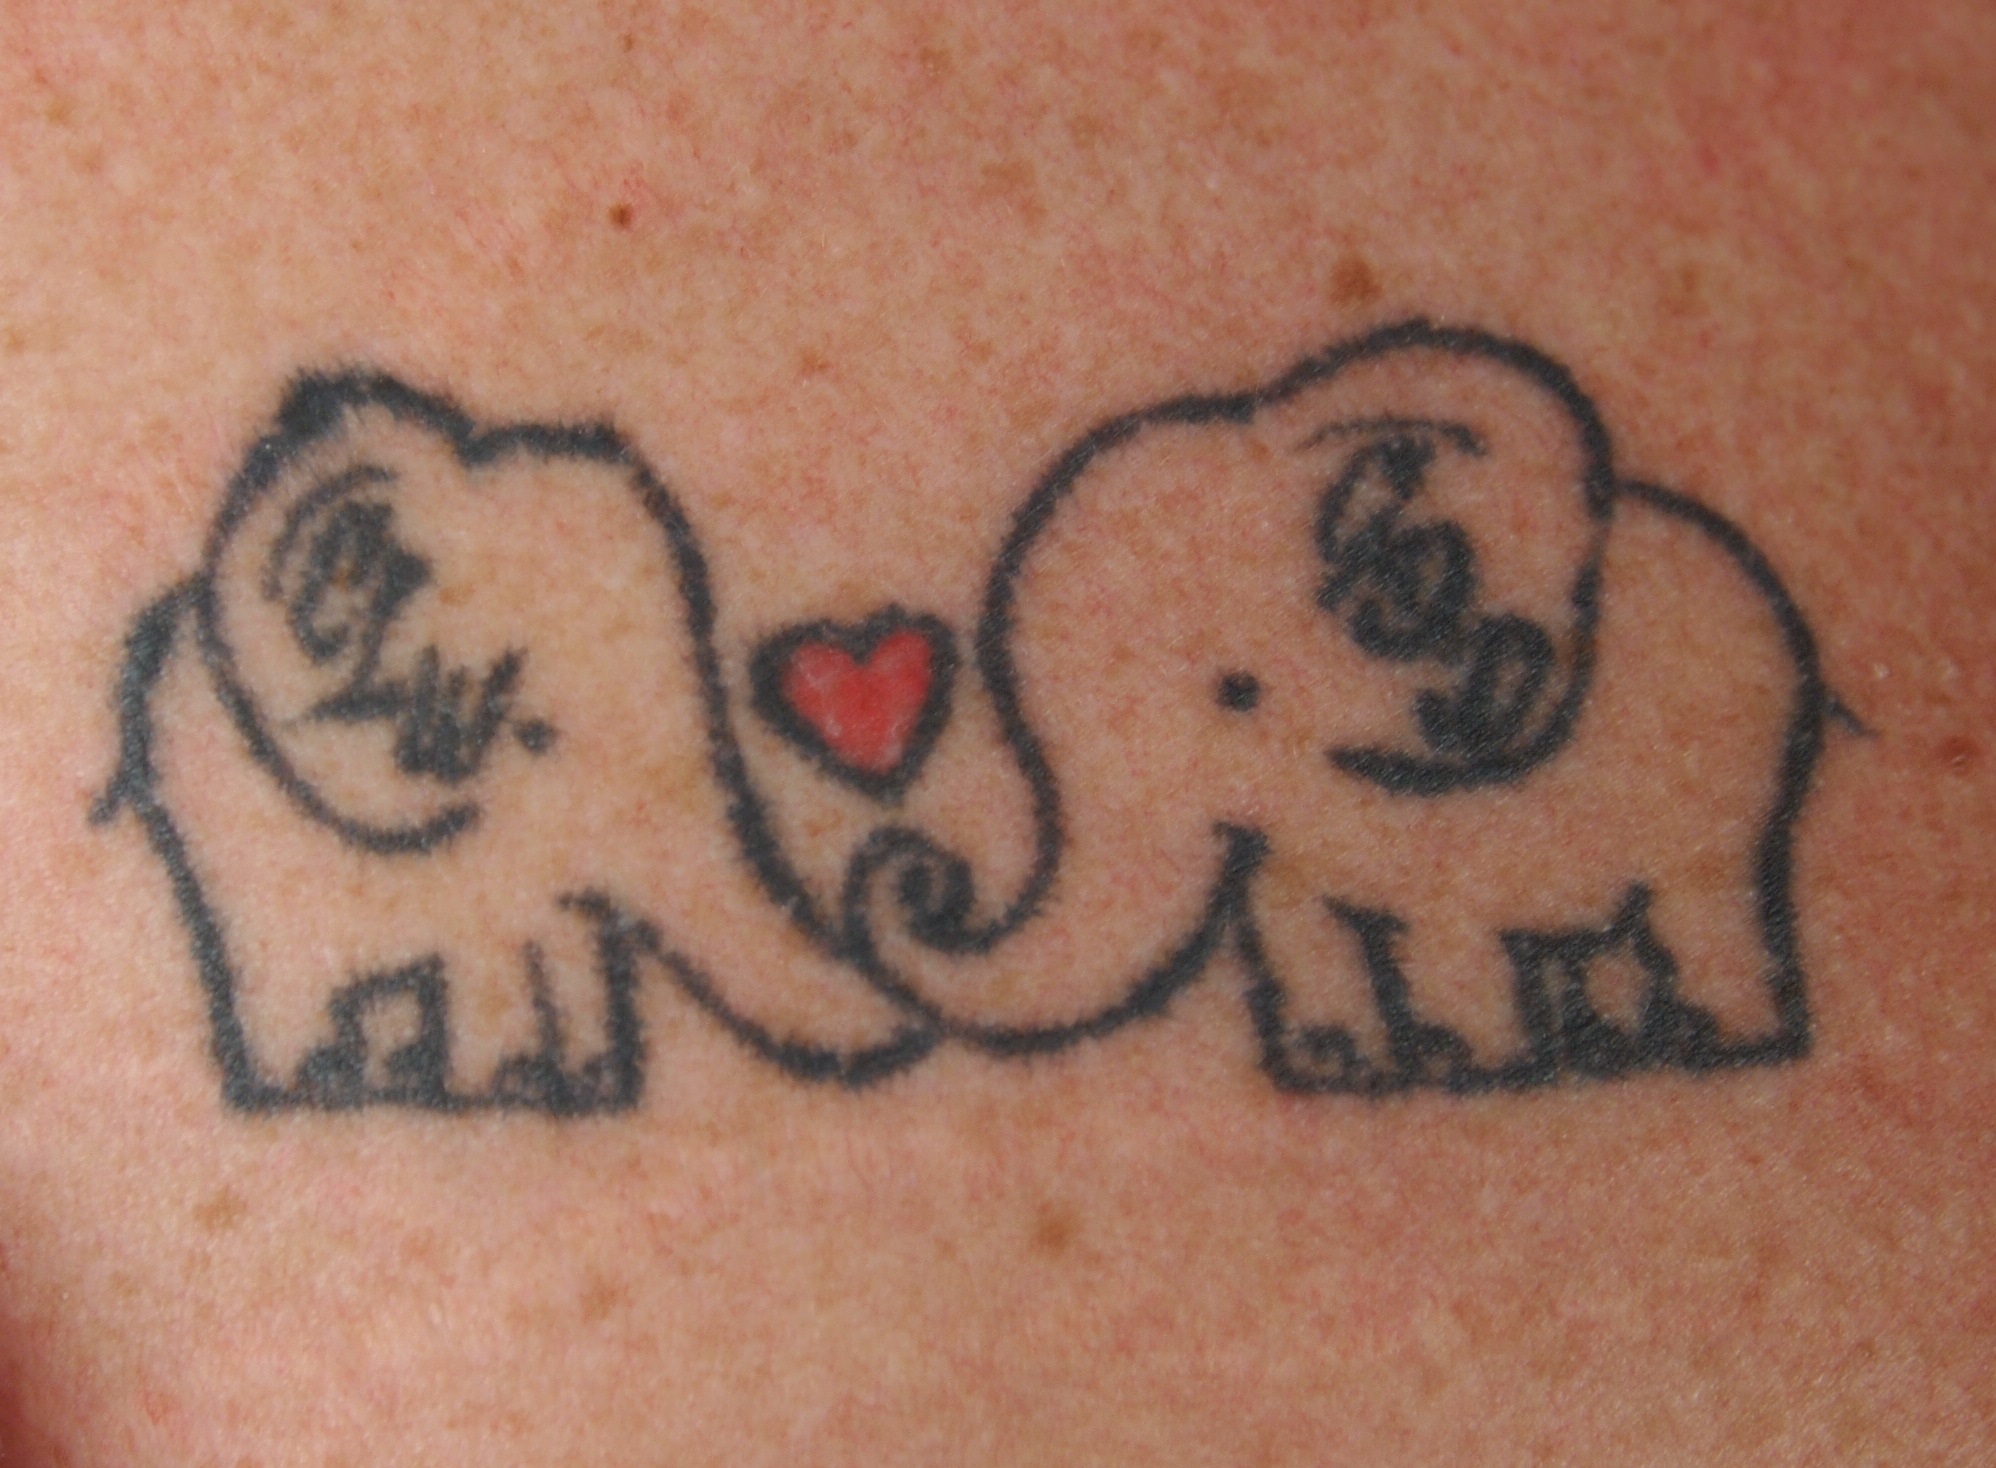 Tattoo on Crystal D. from The Story Behind the Tat: Tattoo Art in Central MN exhibit. Two elephants with a heart - a sister tattoo Crystal shares with her sister Grace. Tattoo by Jason Brigmon of Skyline Tattoo, Little Falls, MN 2015.